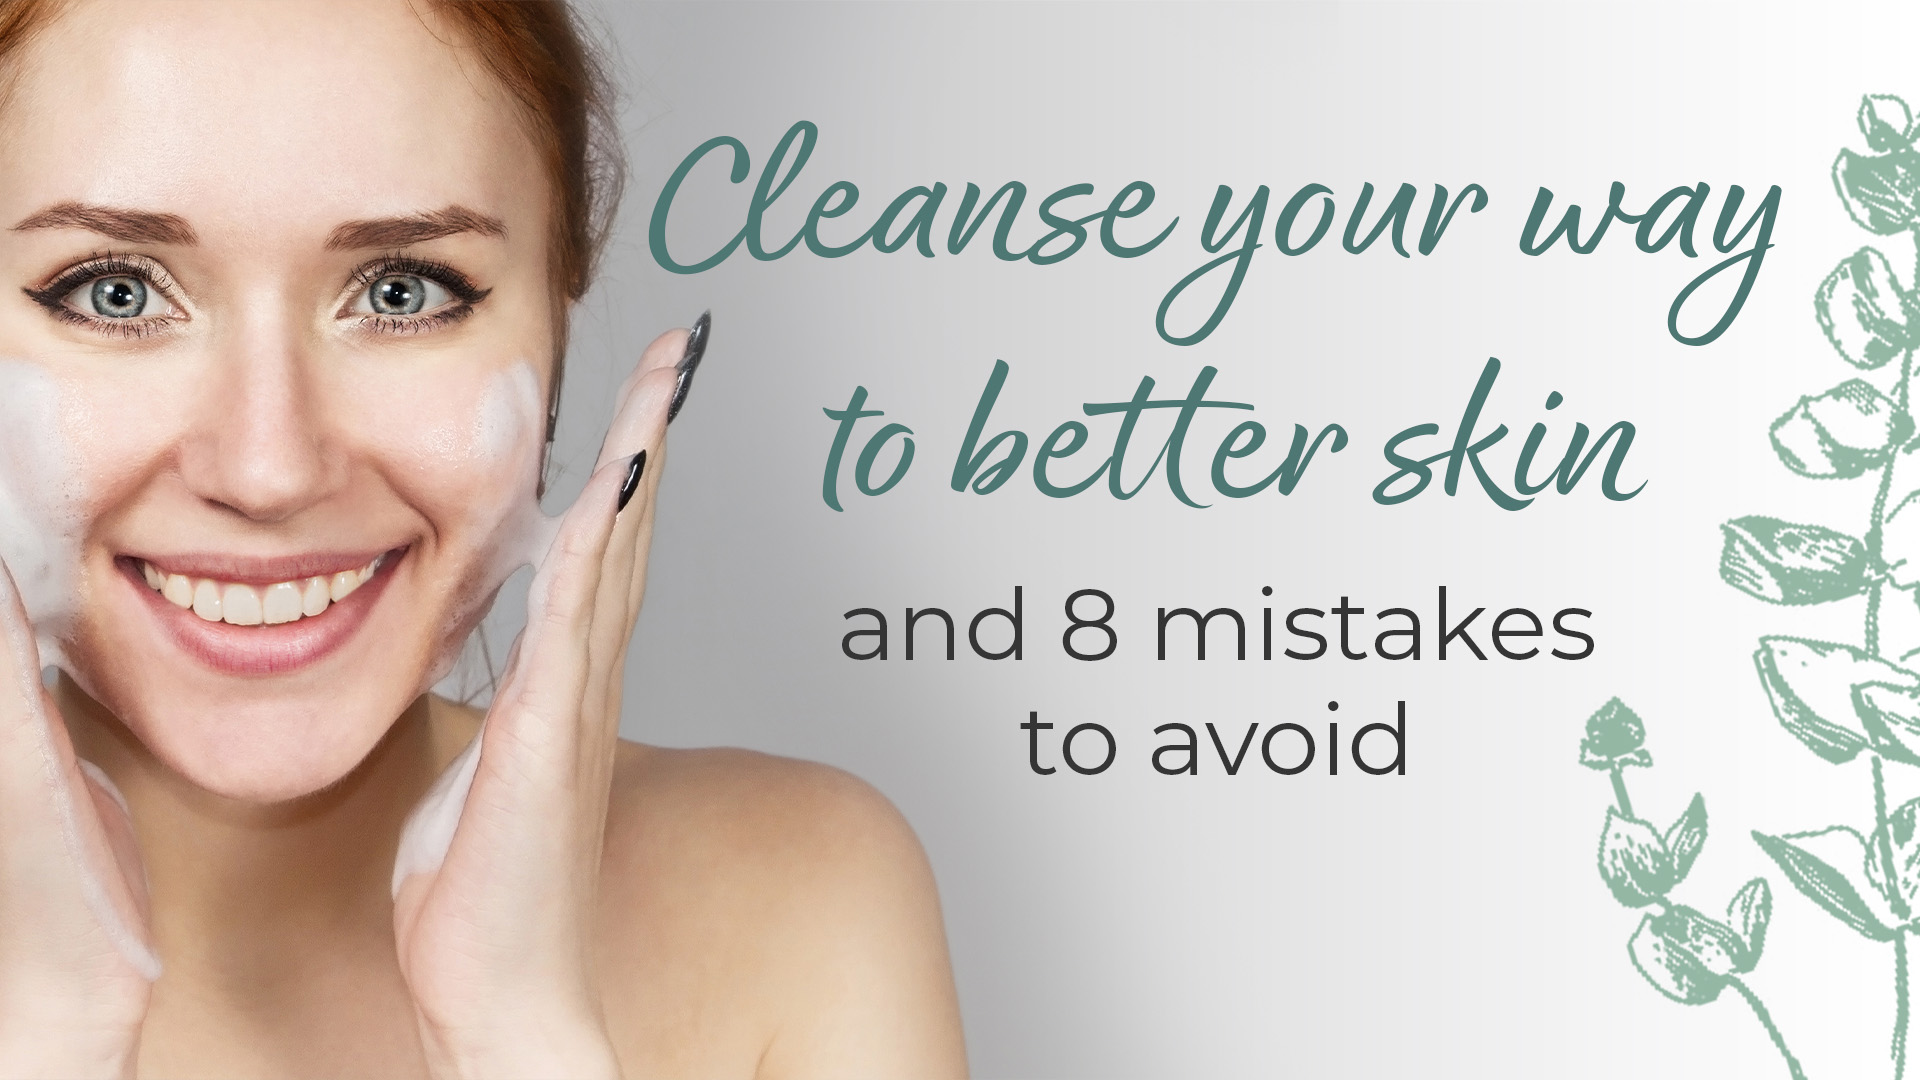 Cleanse your way to better skin and 8 mistakes to avoid